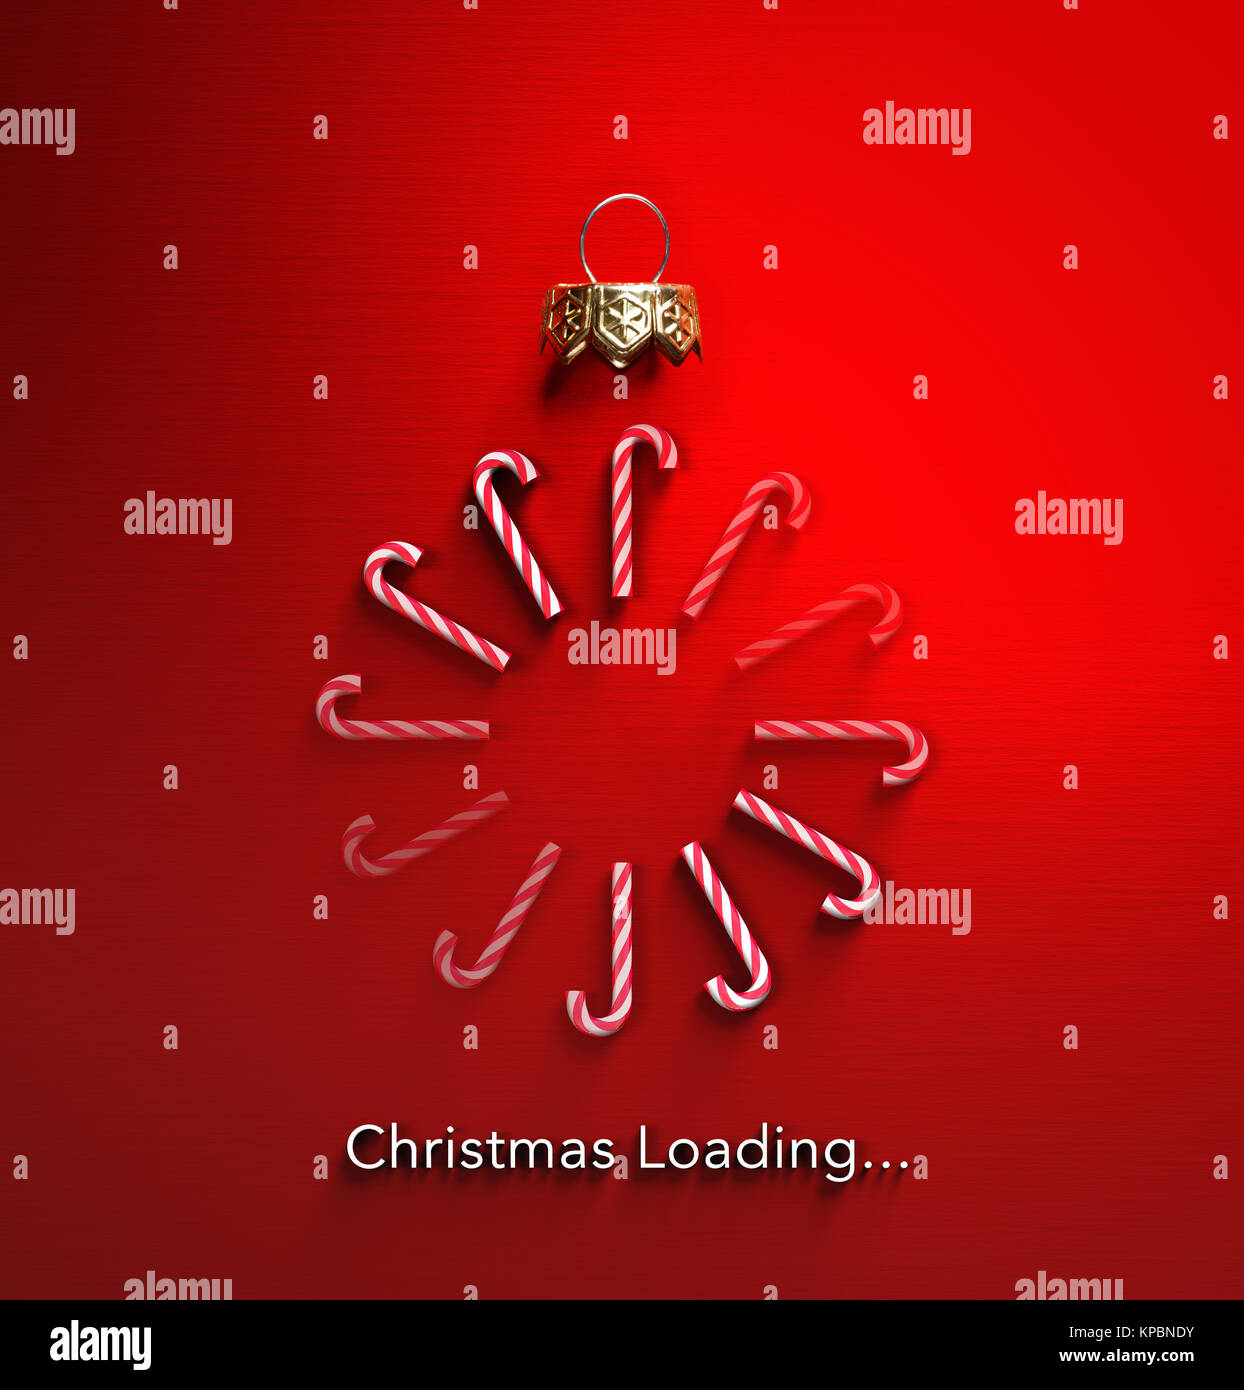 Christmas Loading - Candy Canes In Bauble Shape And Downloading Stock Photo